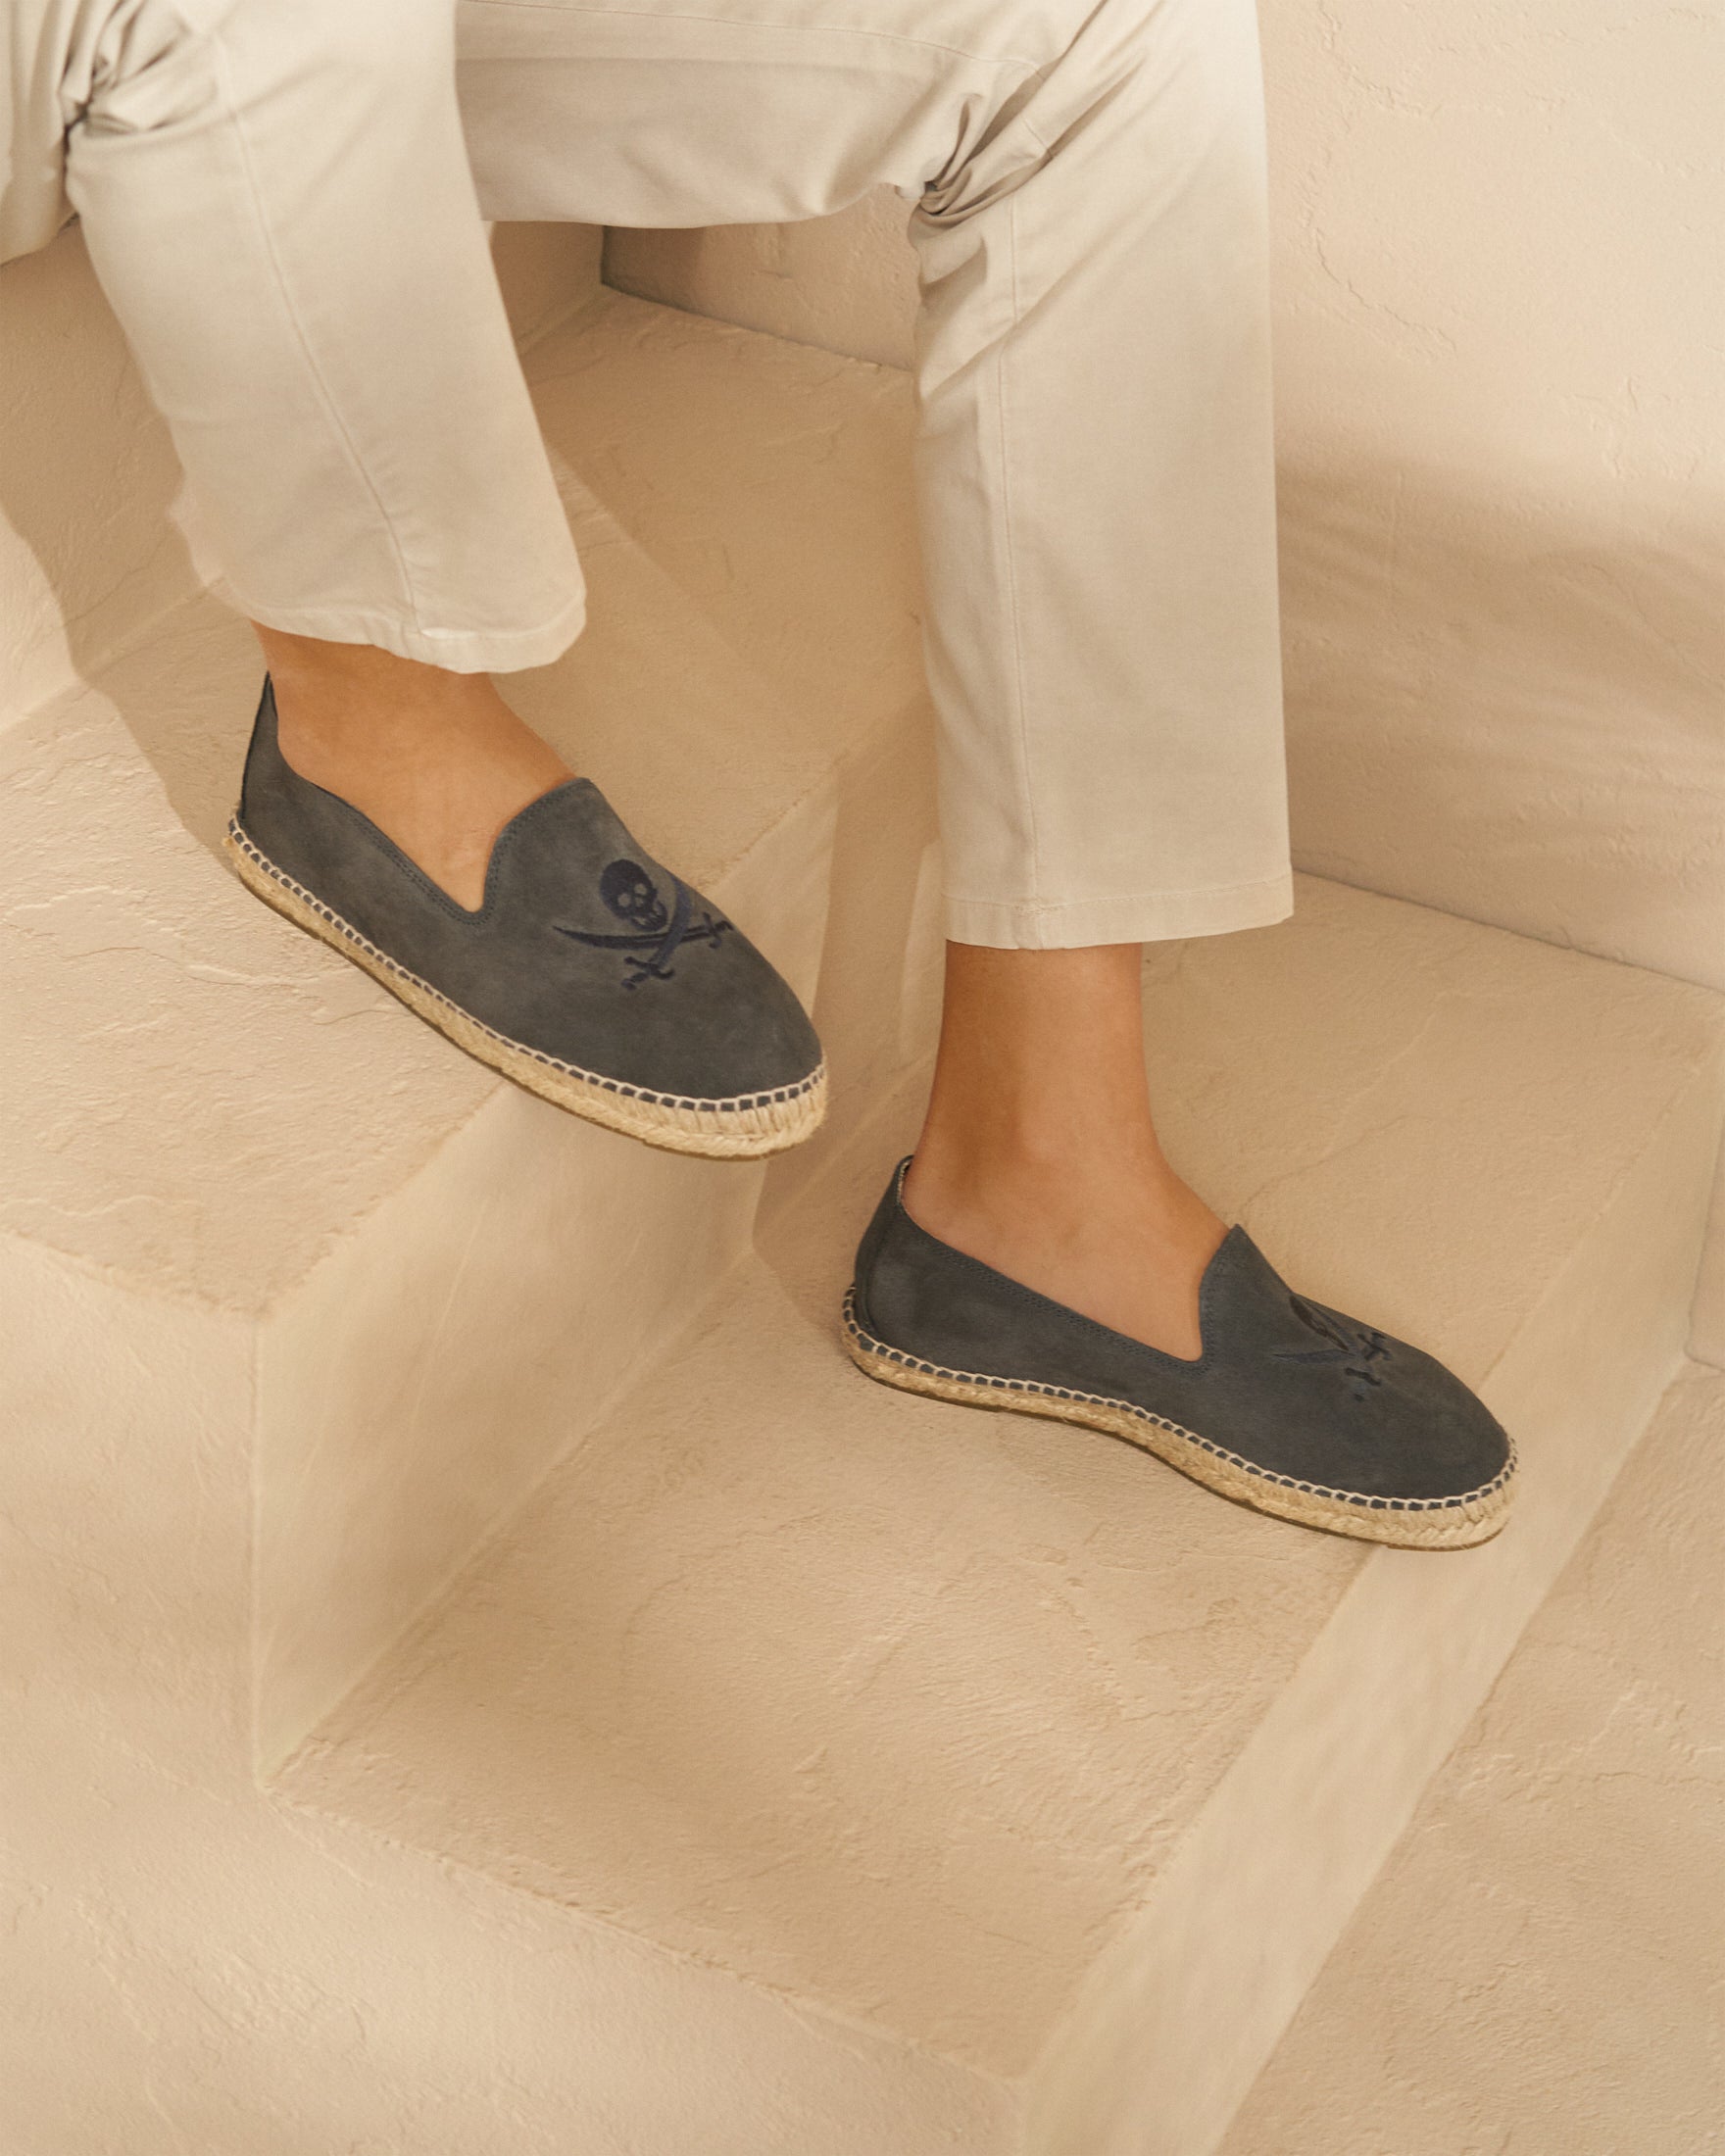 Suede Flat Espadrilles - Palm Springs - Carbon Grey + Skull On Tone